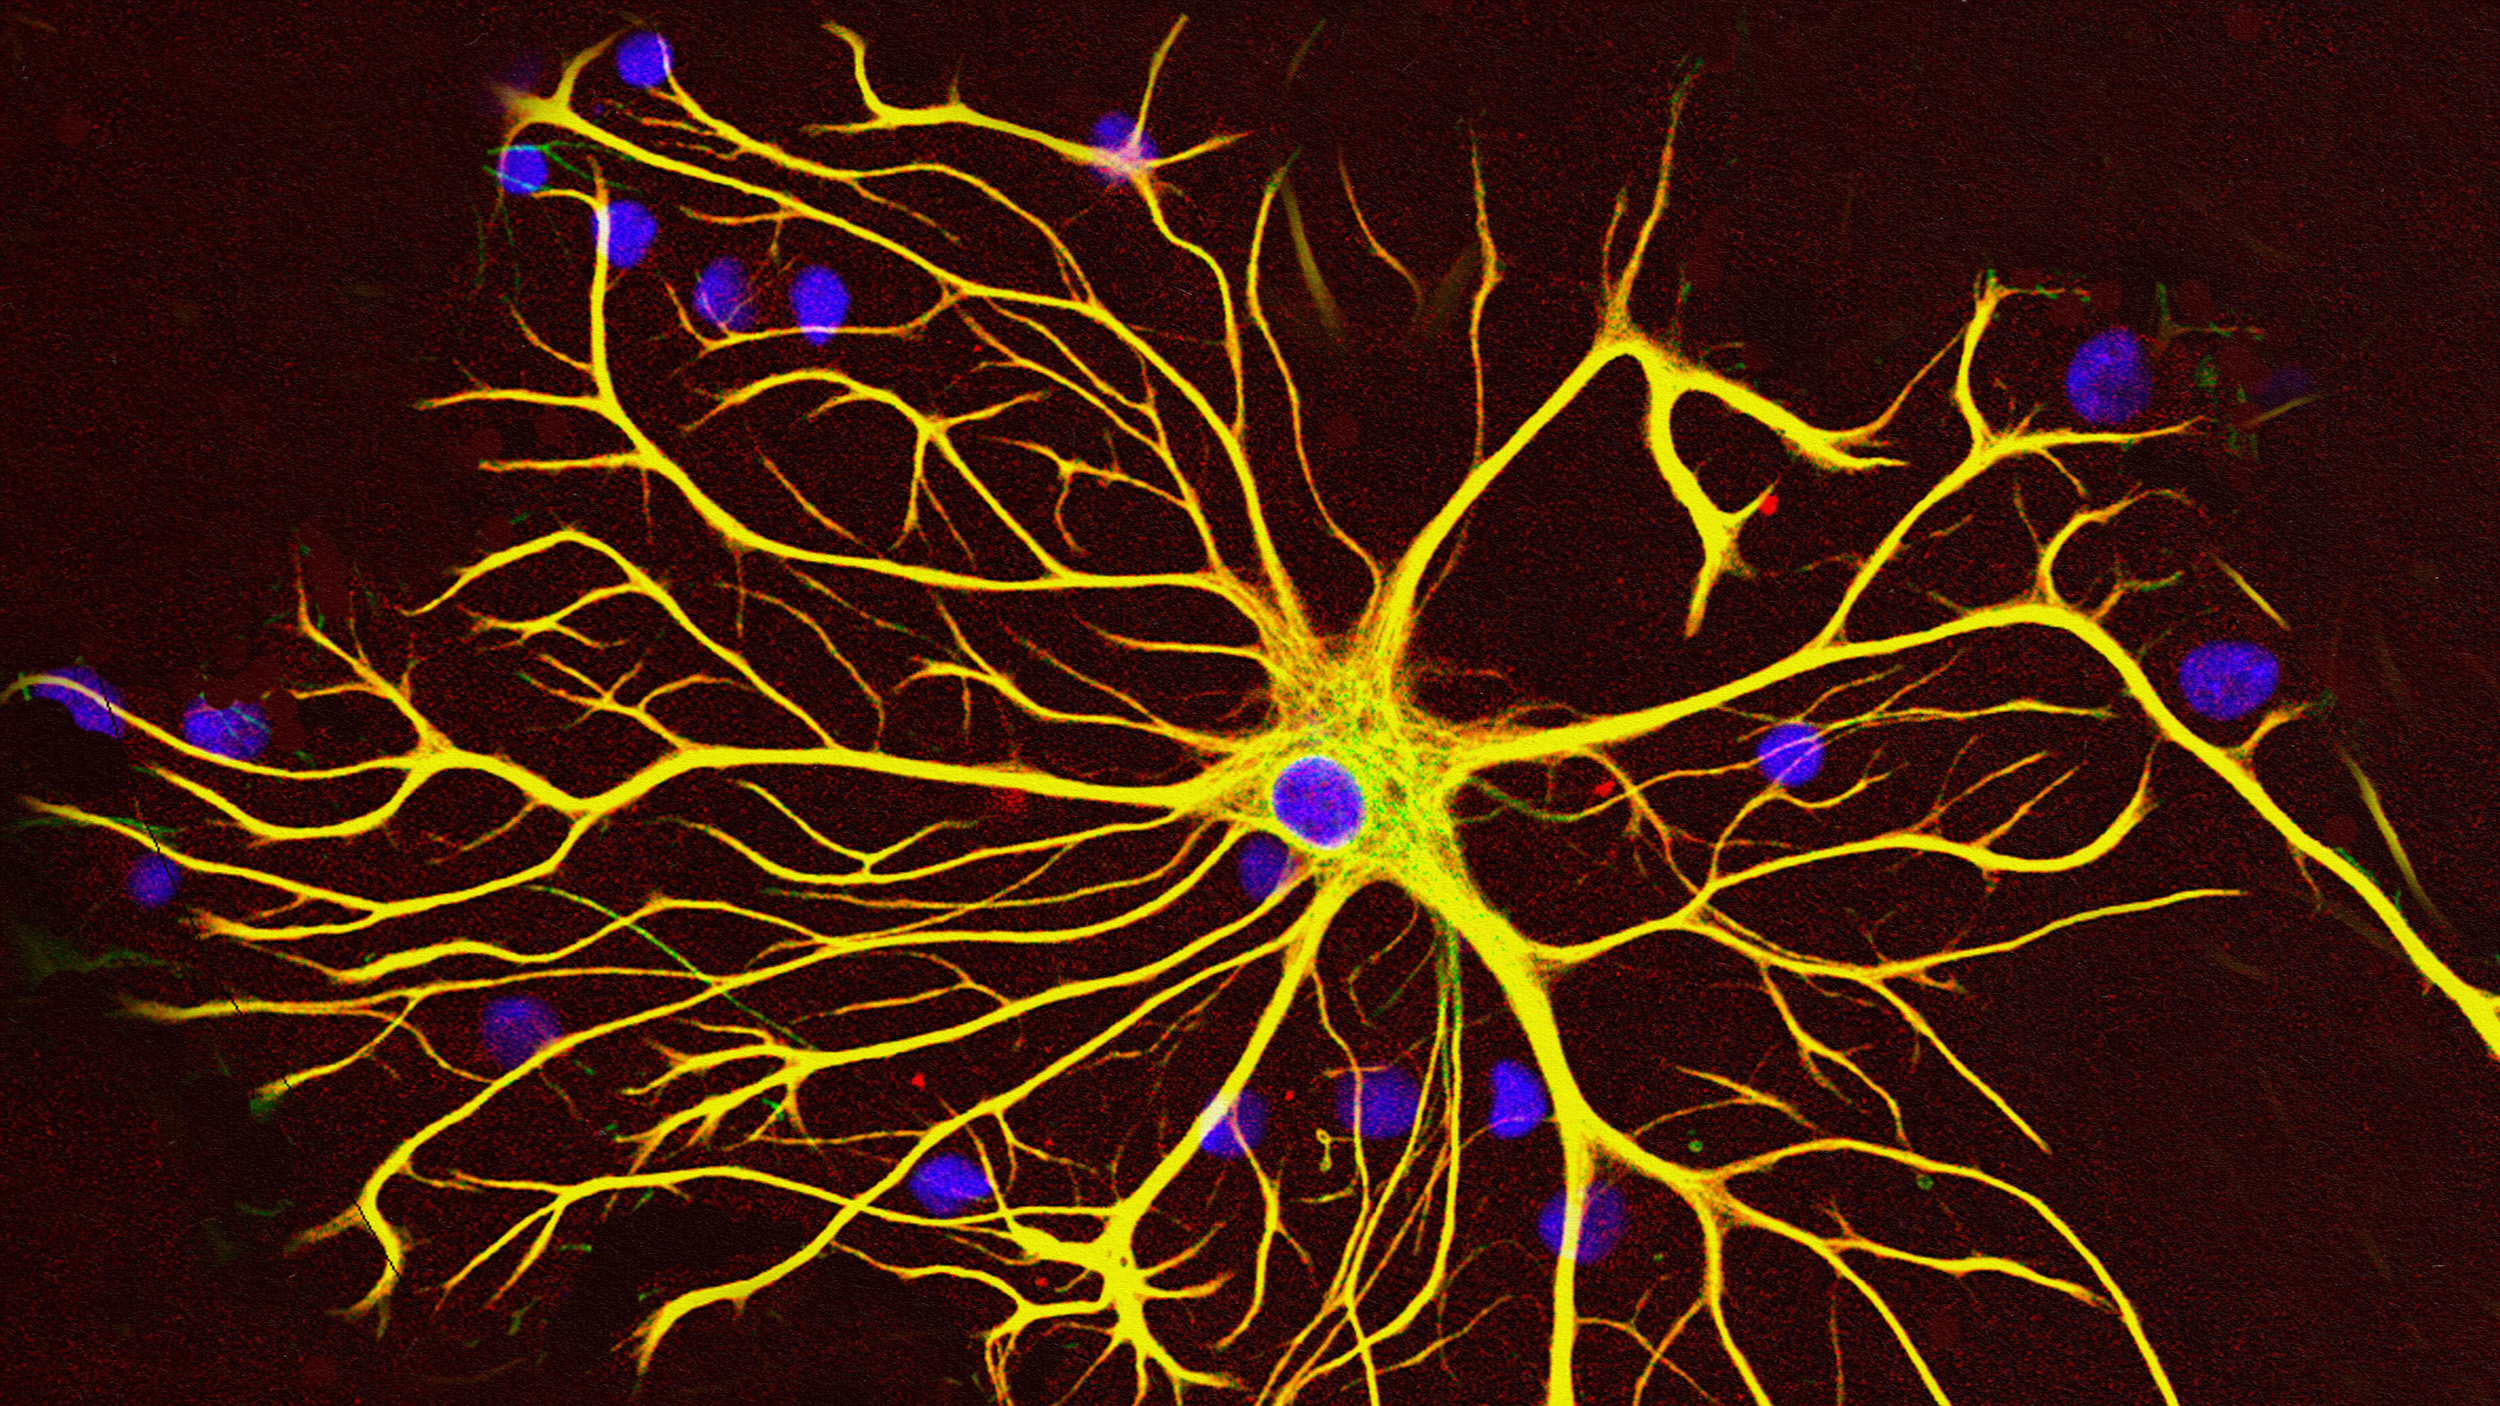 An image of a new neuron with blue and yellow lights.